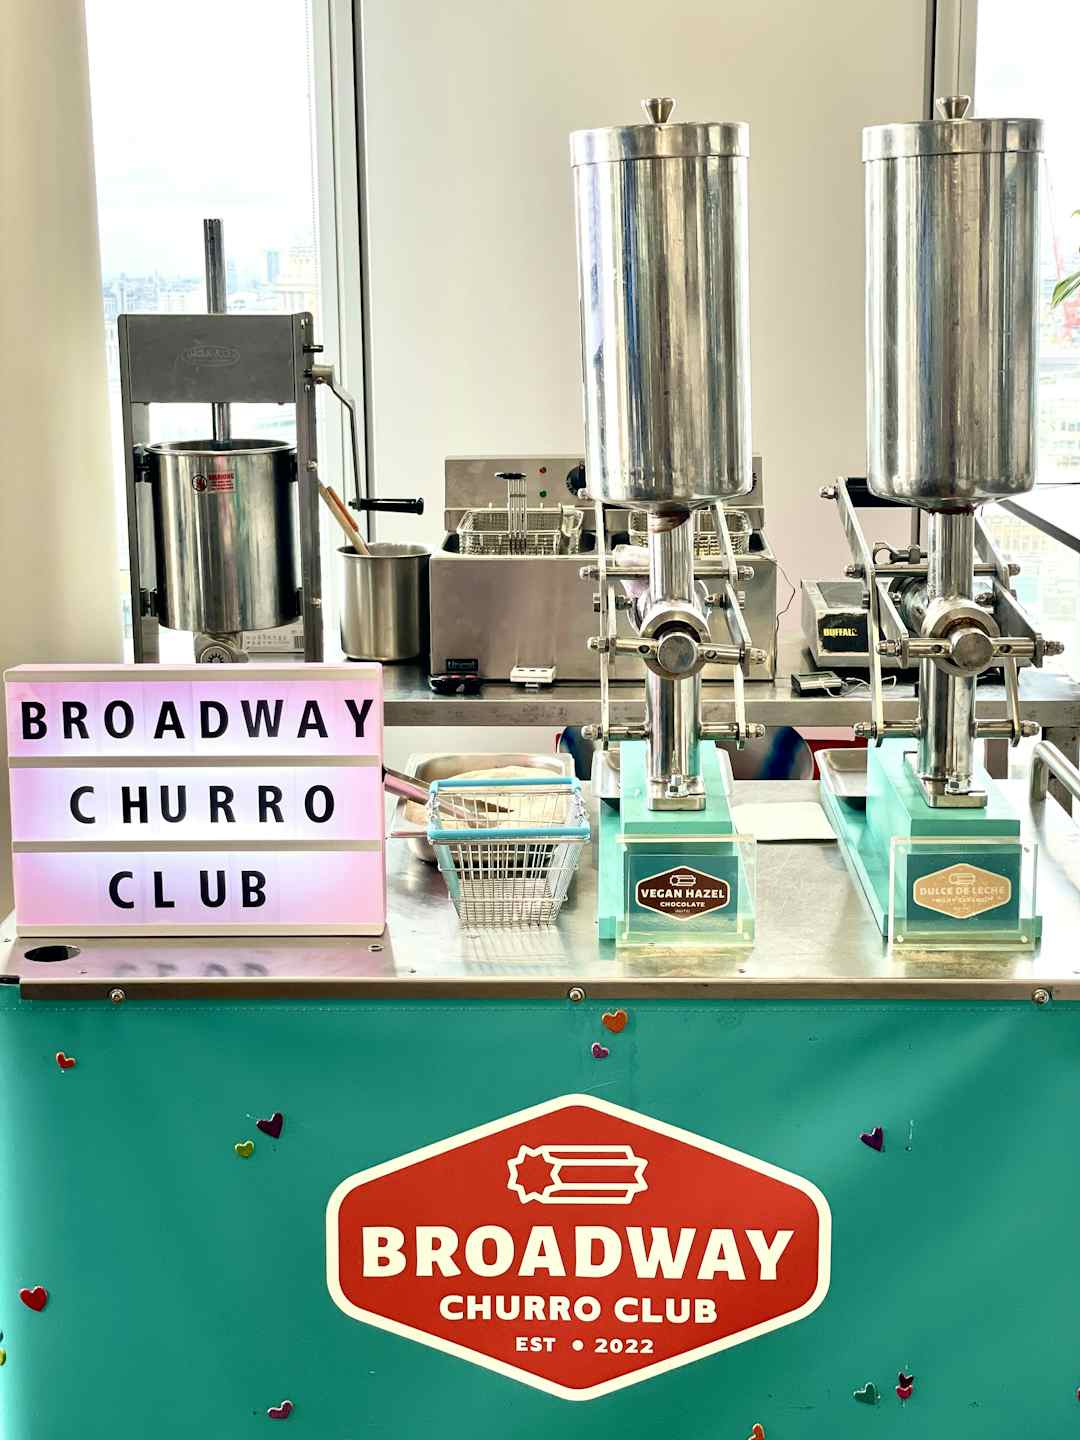 Hero image for supplier Broadway Churro Club